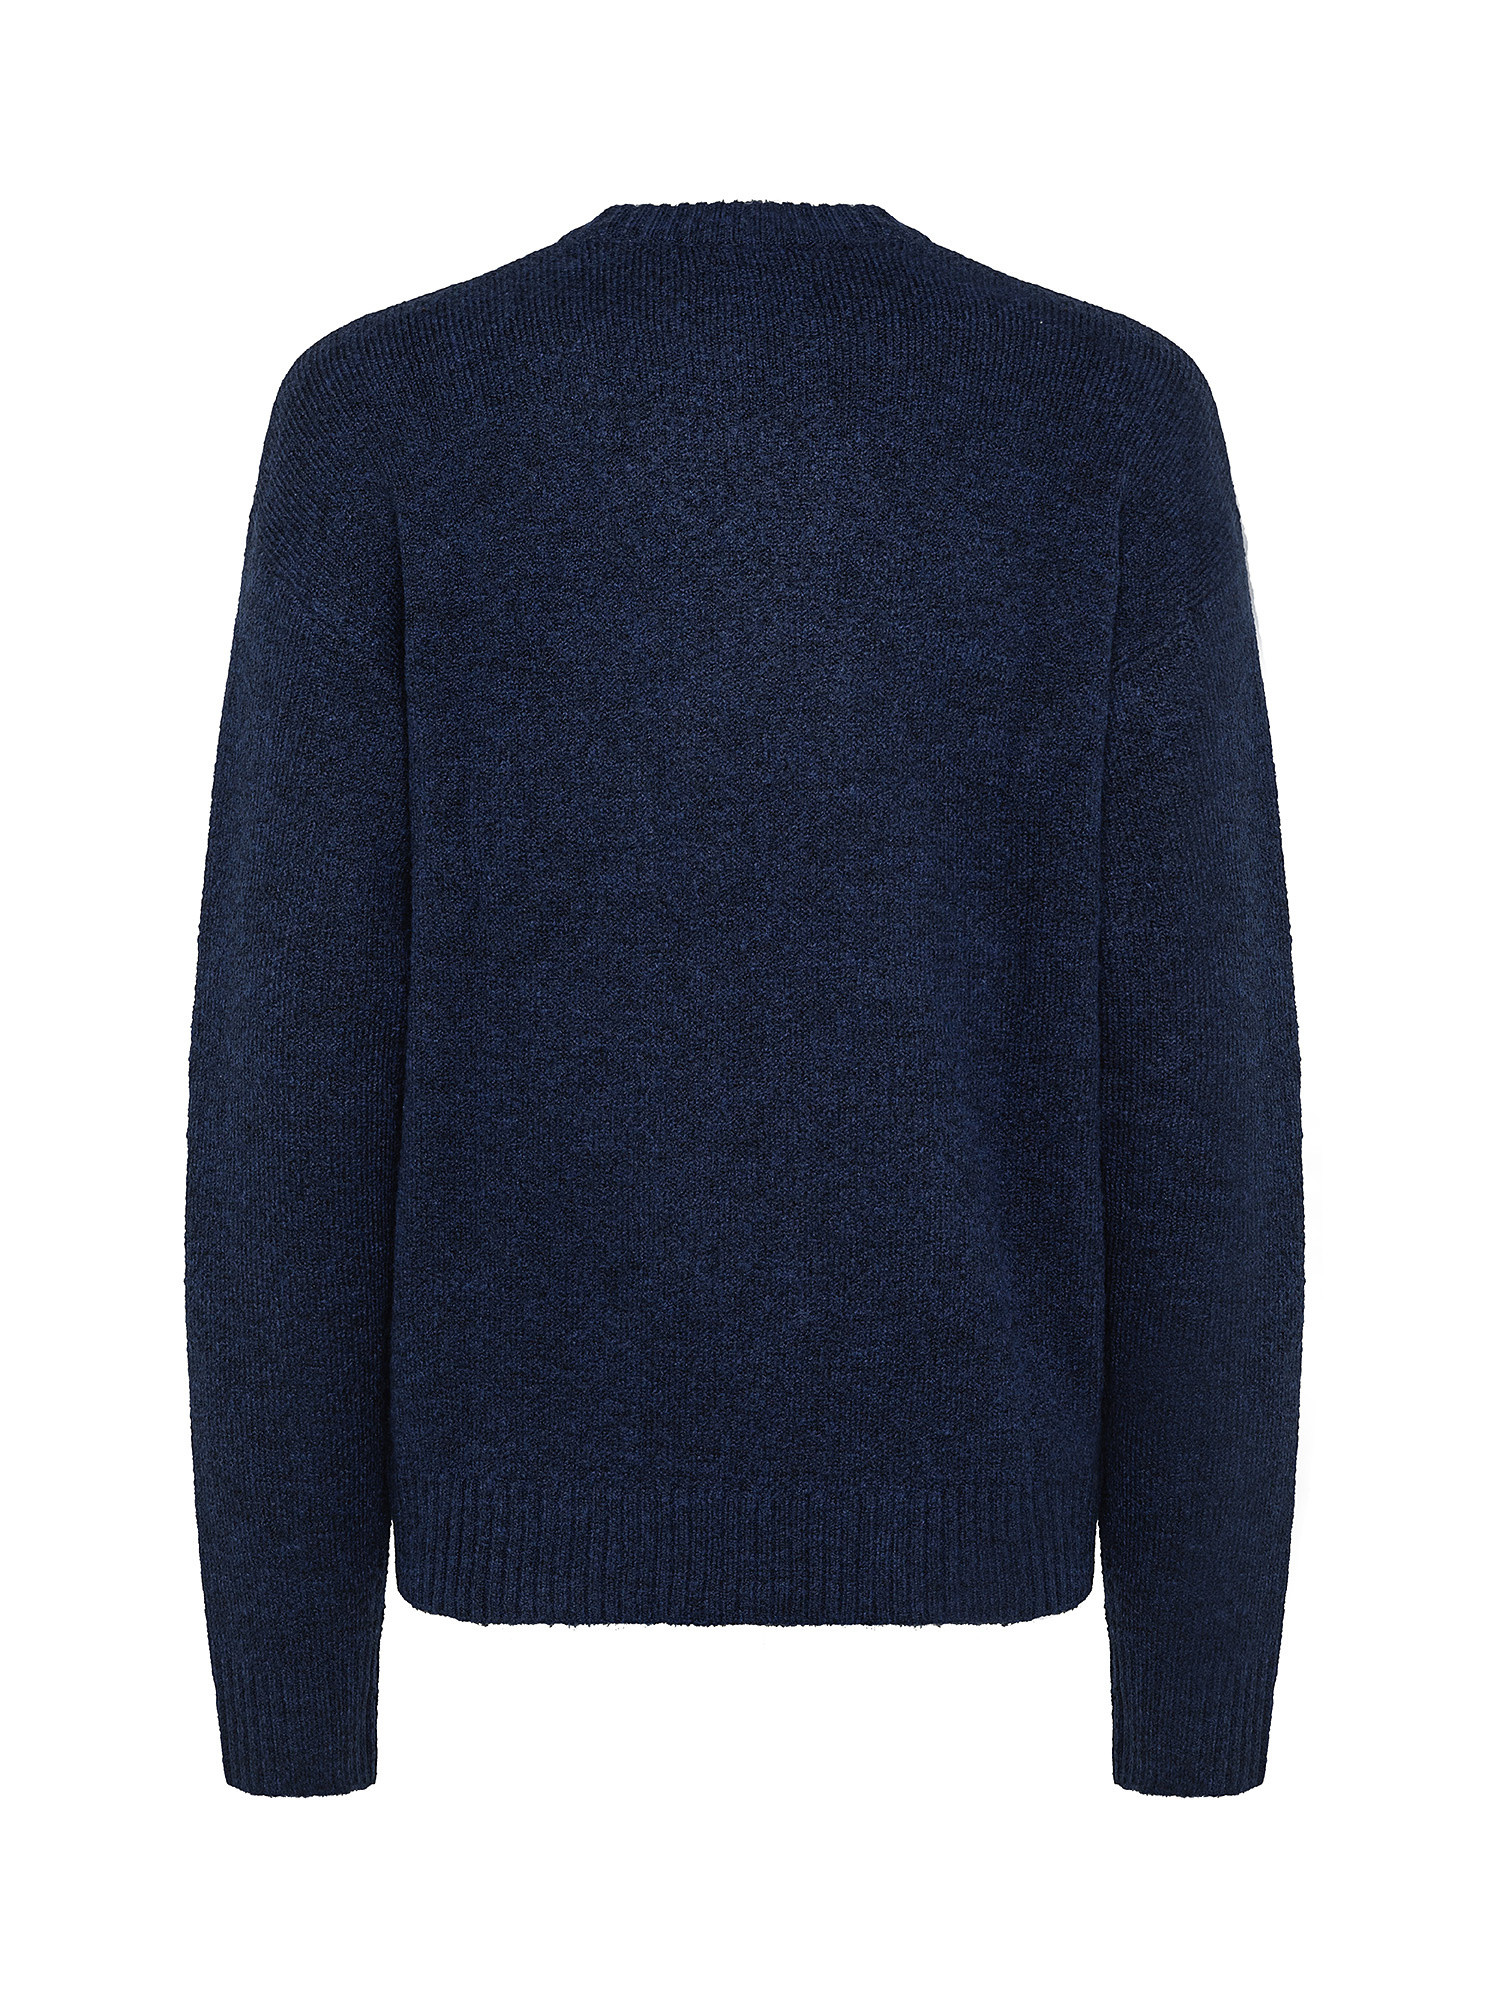 Pullover with long sleeves, Blue, large image number 1